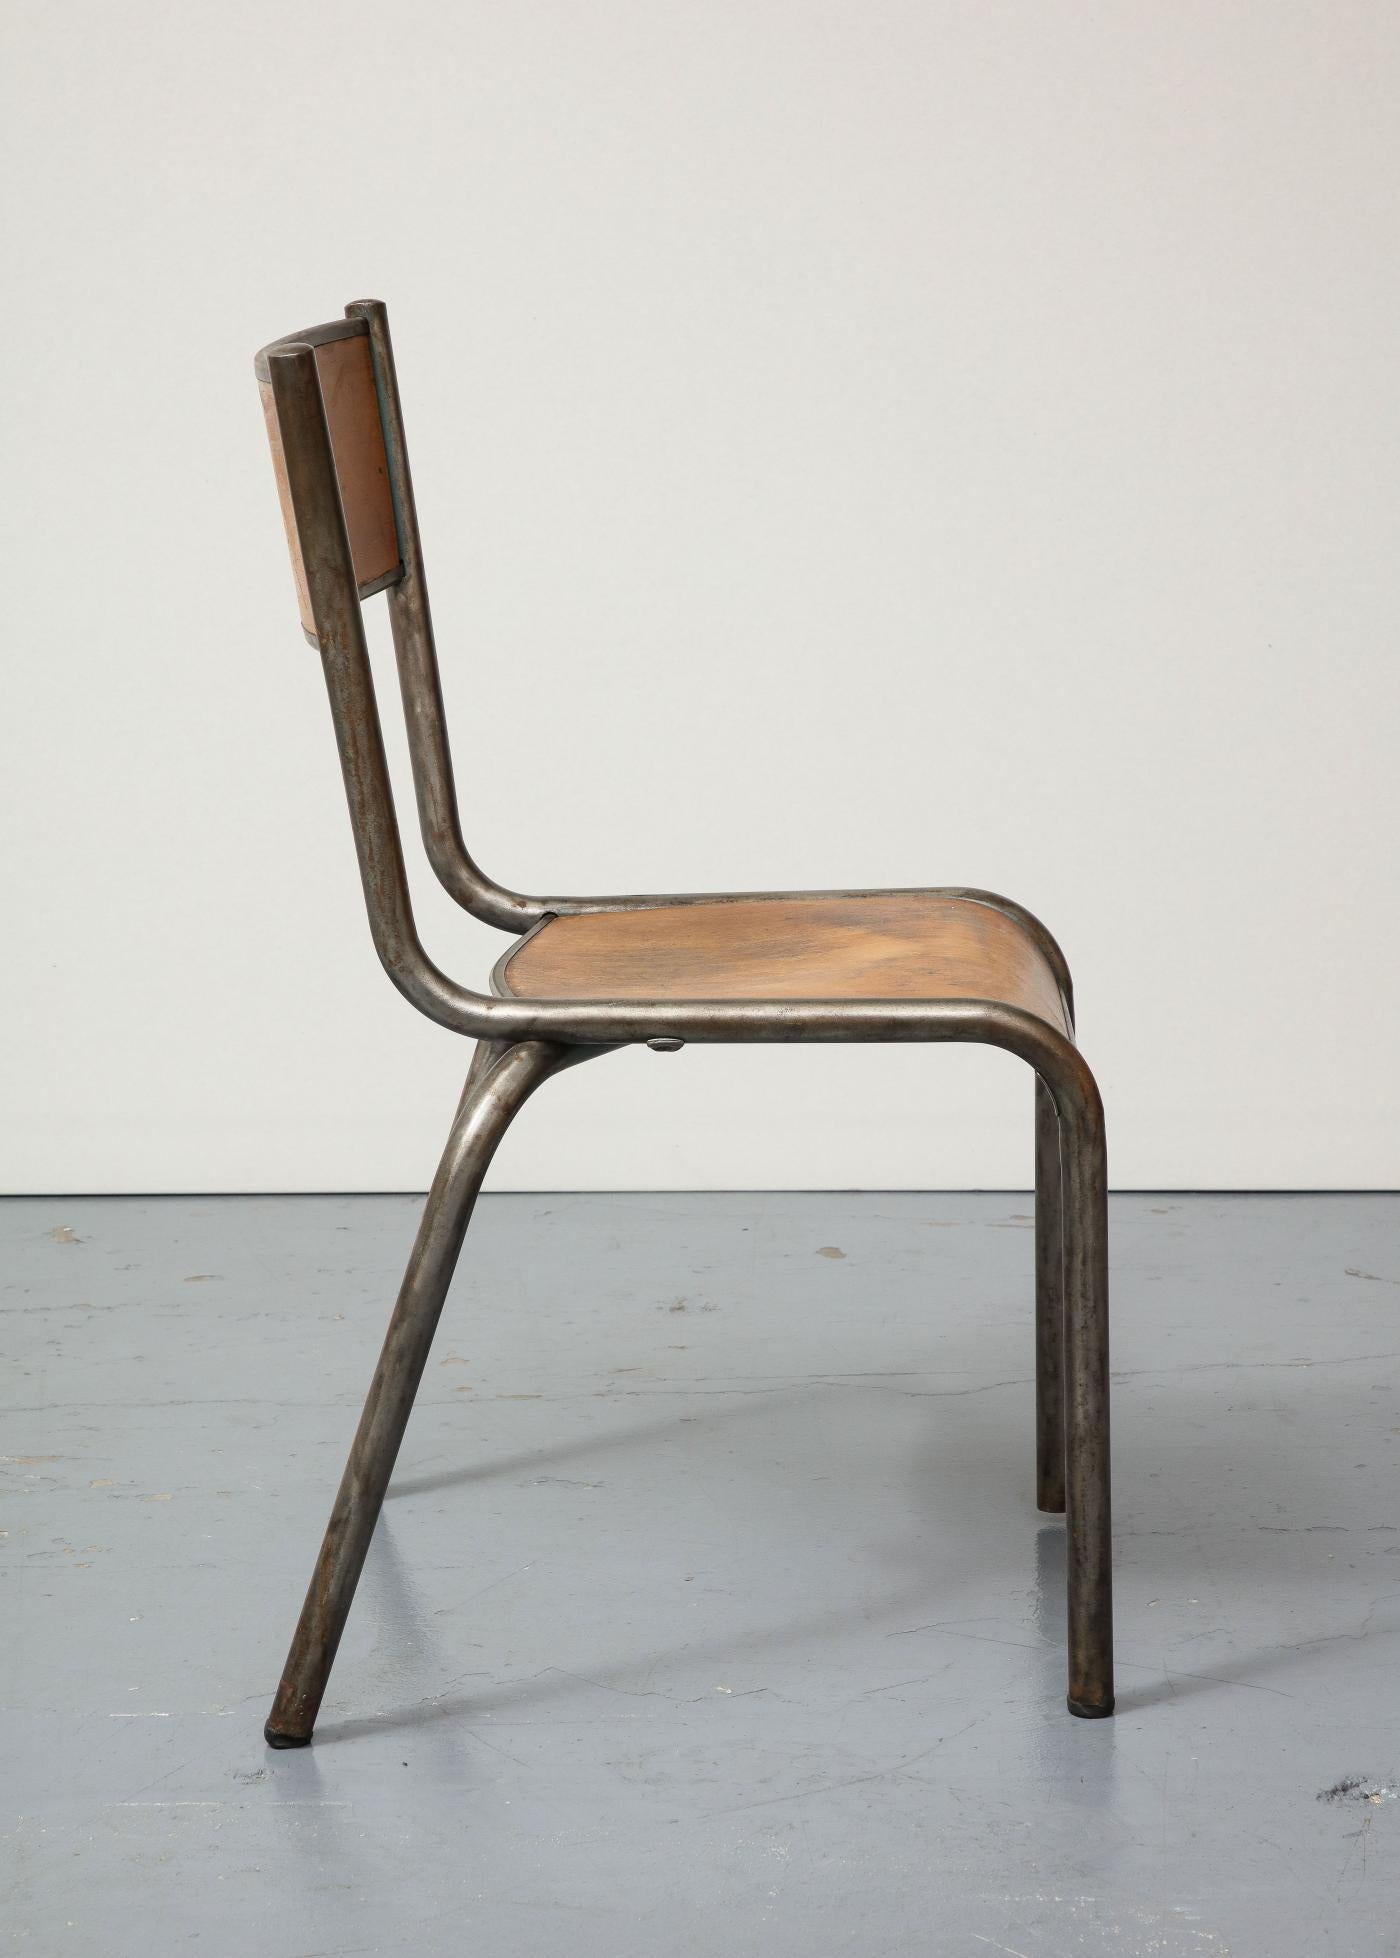 Polished Steel and Bentwood Chair, France, c. 1940

Rustic, beautifully patinated chair with tubular steel and bent wood.